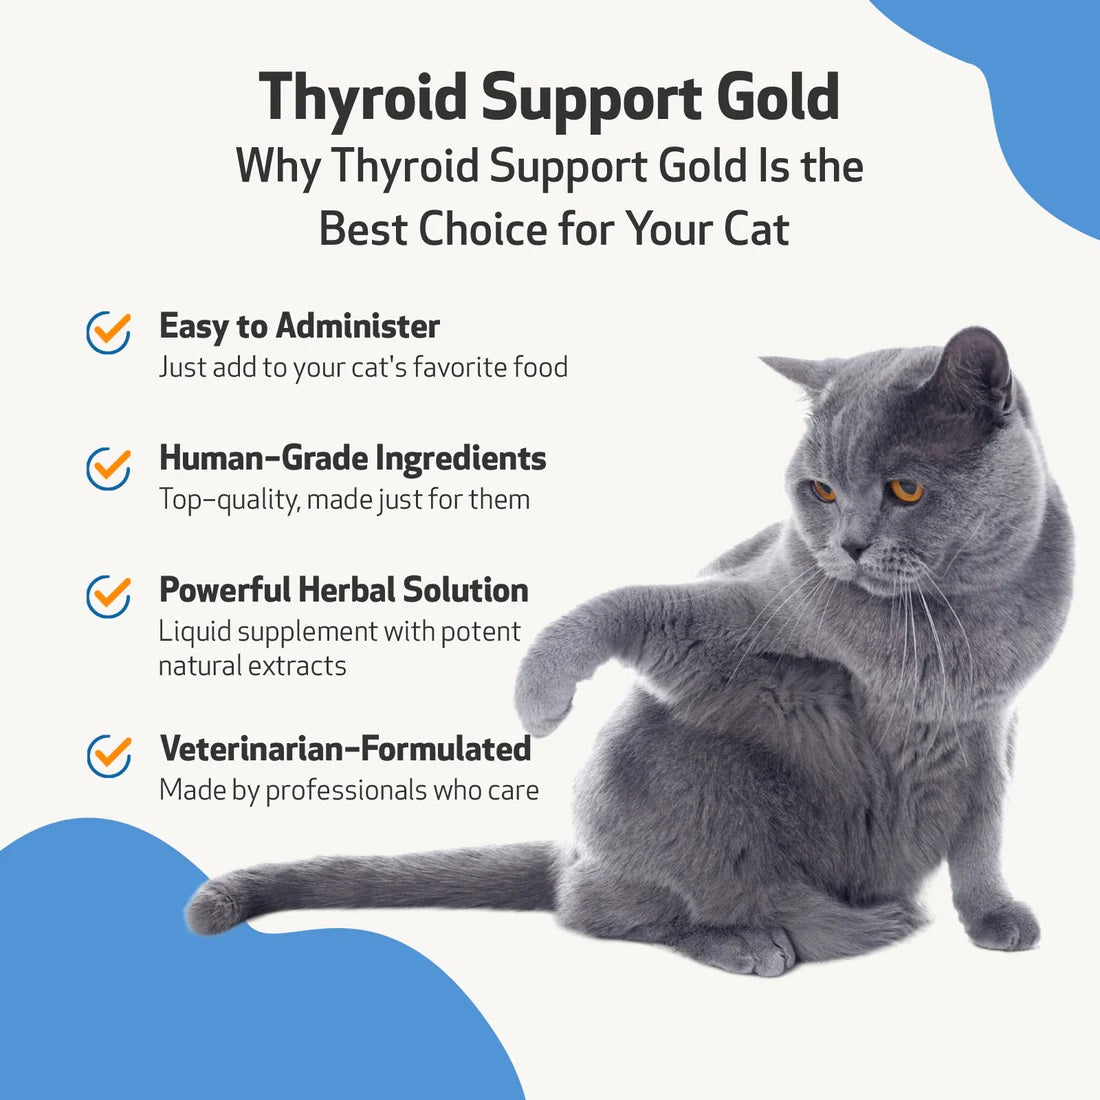 Pet Wellbeing - Thyroid Support Gold for Cats & Dogs - Trusted Care for Hyperthyroid